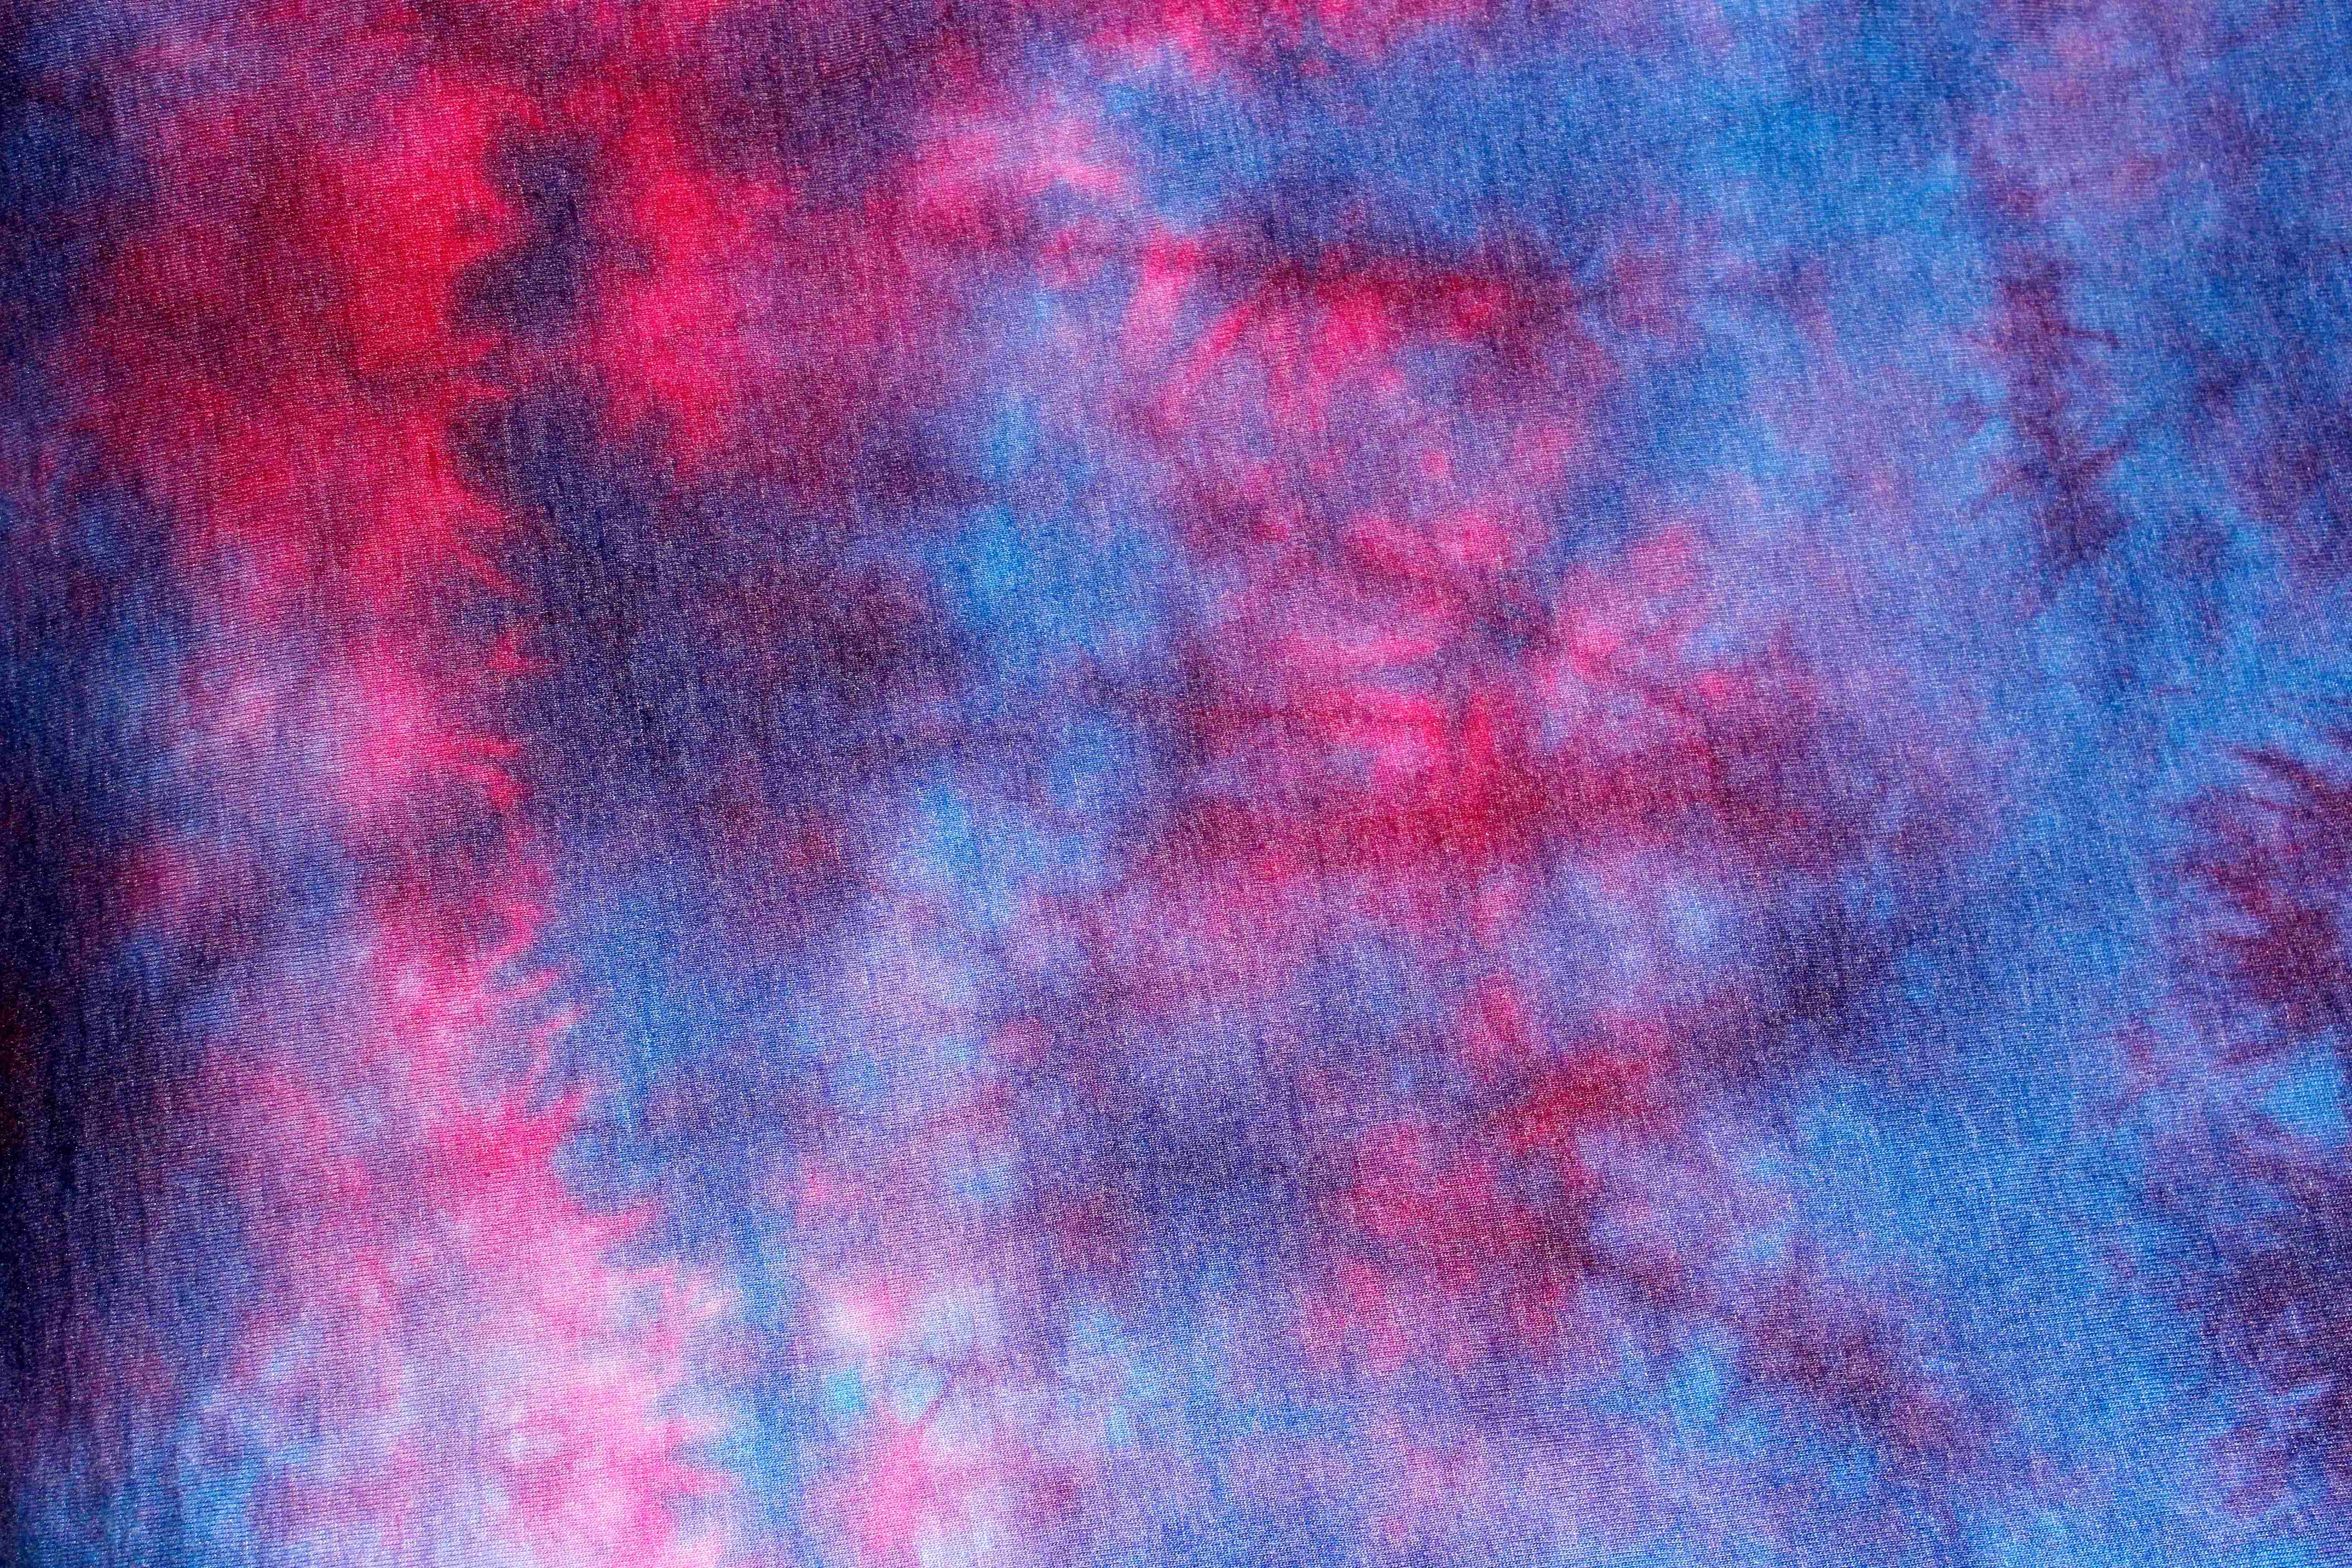 Pastel Backgrounds - Red And Blue Tie Dye Background - 5184x3456 Wallpaper  